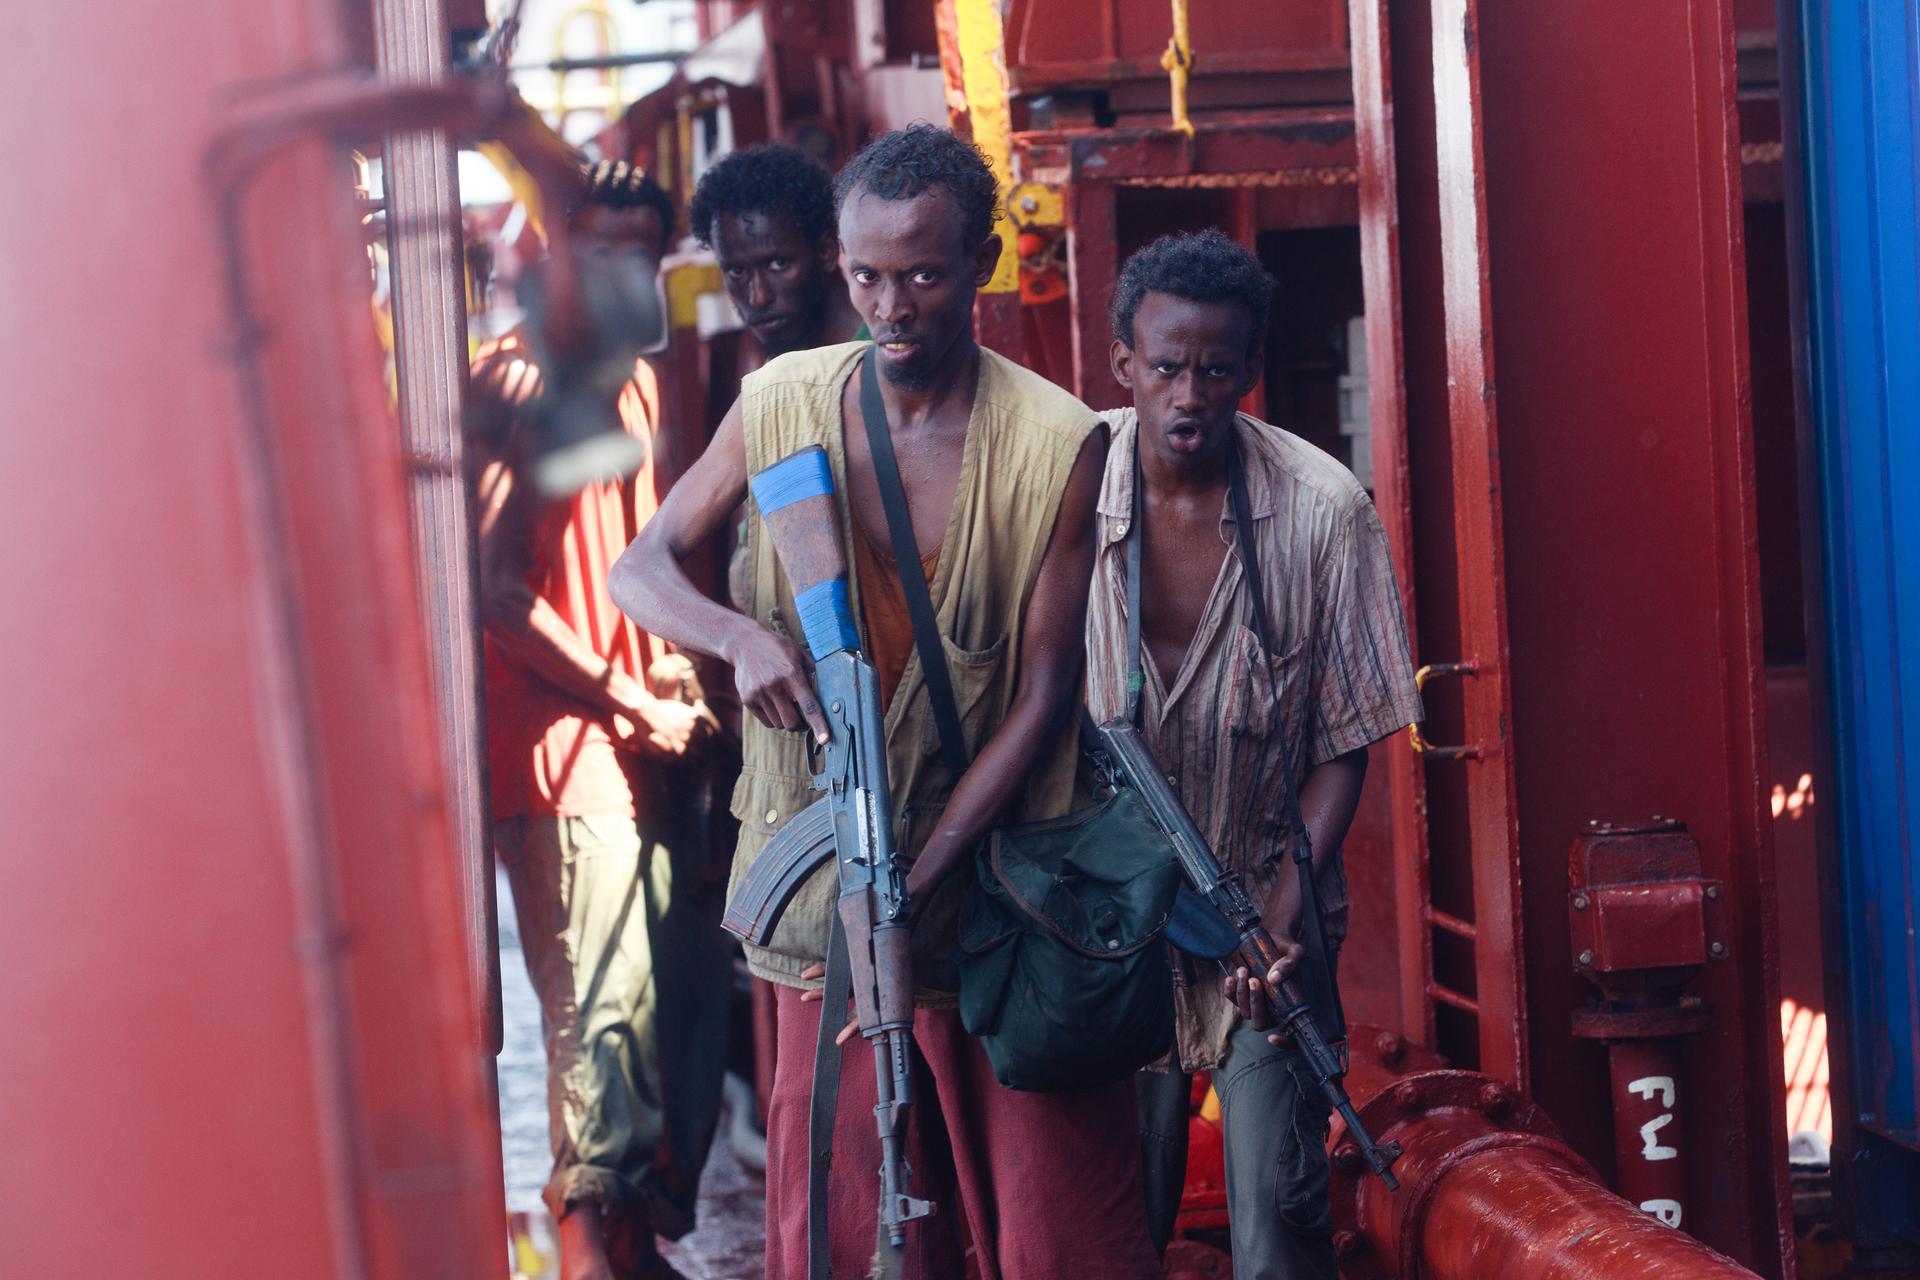 Barkhad Abdi, a first-time actor who plays the lead pirate in "Captain Phillips."